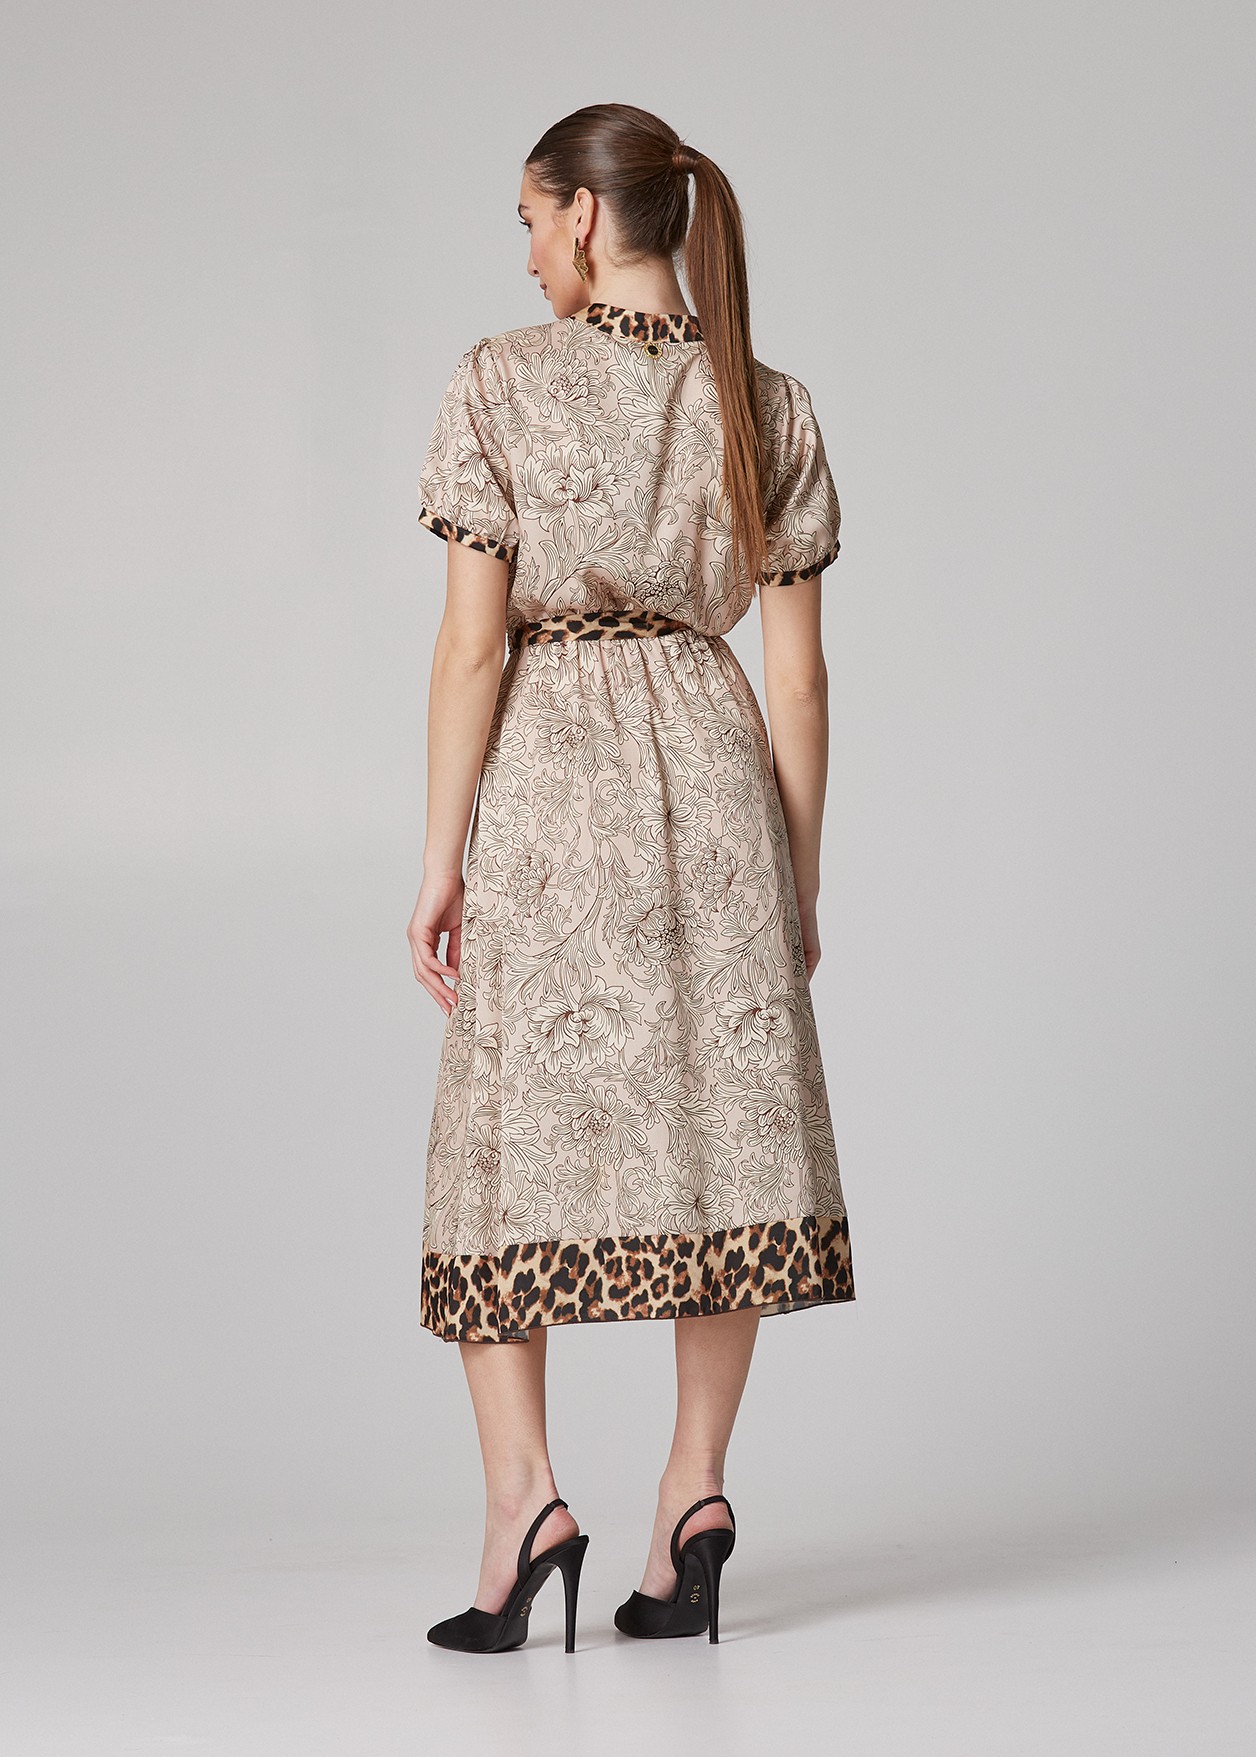 Midi floral dress with animal print details